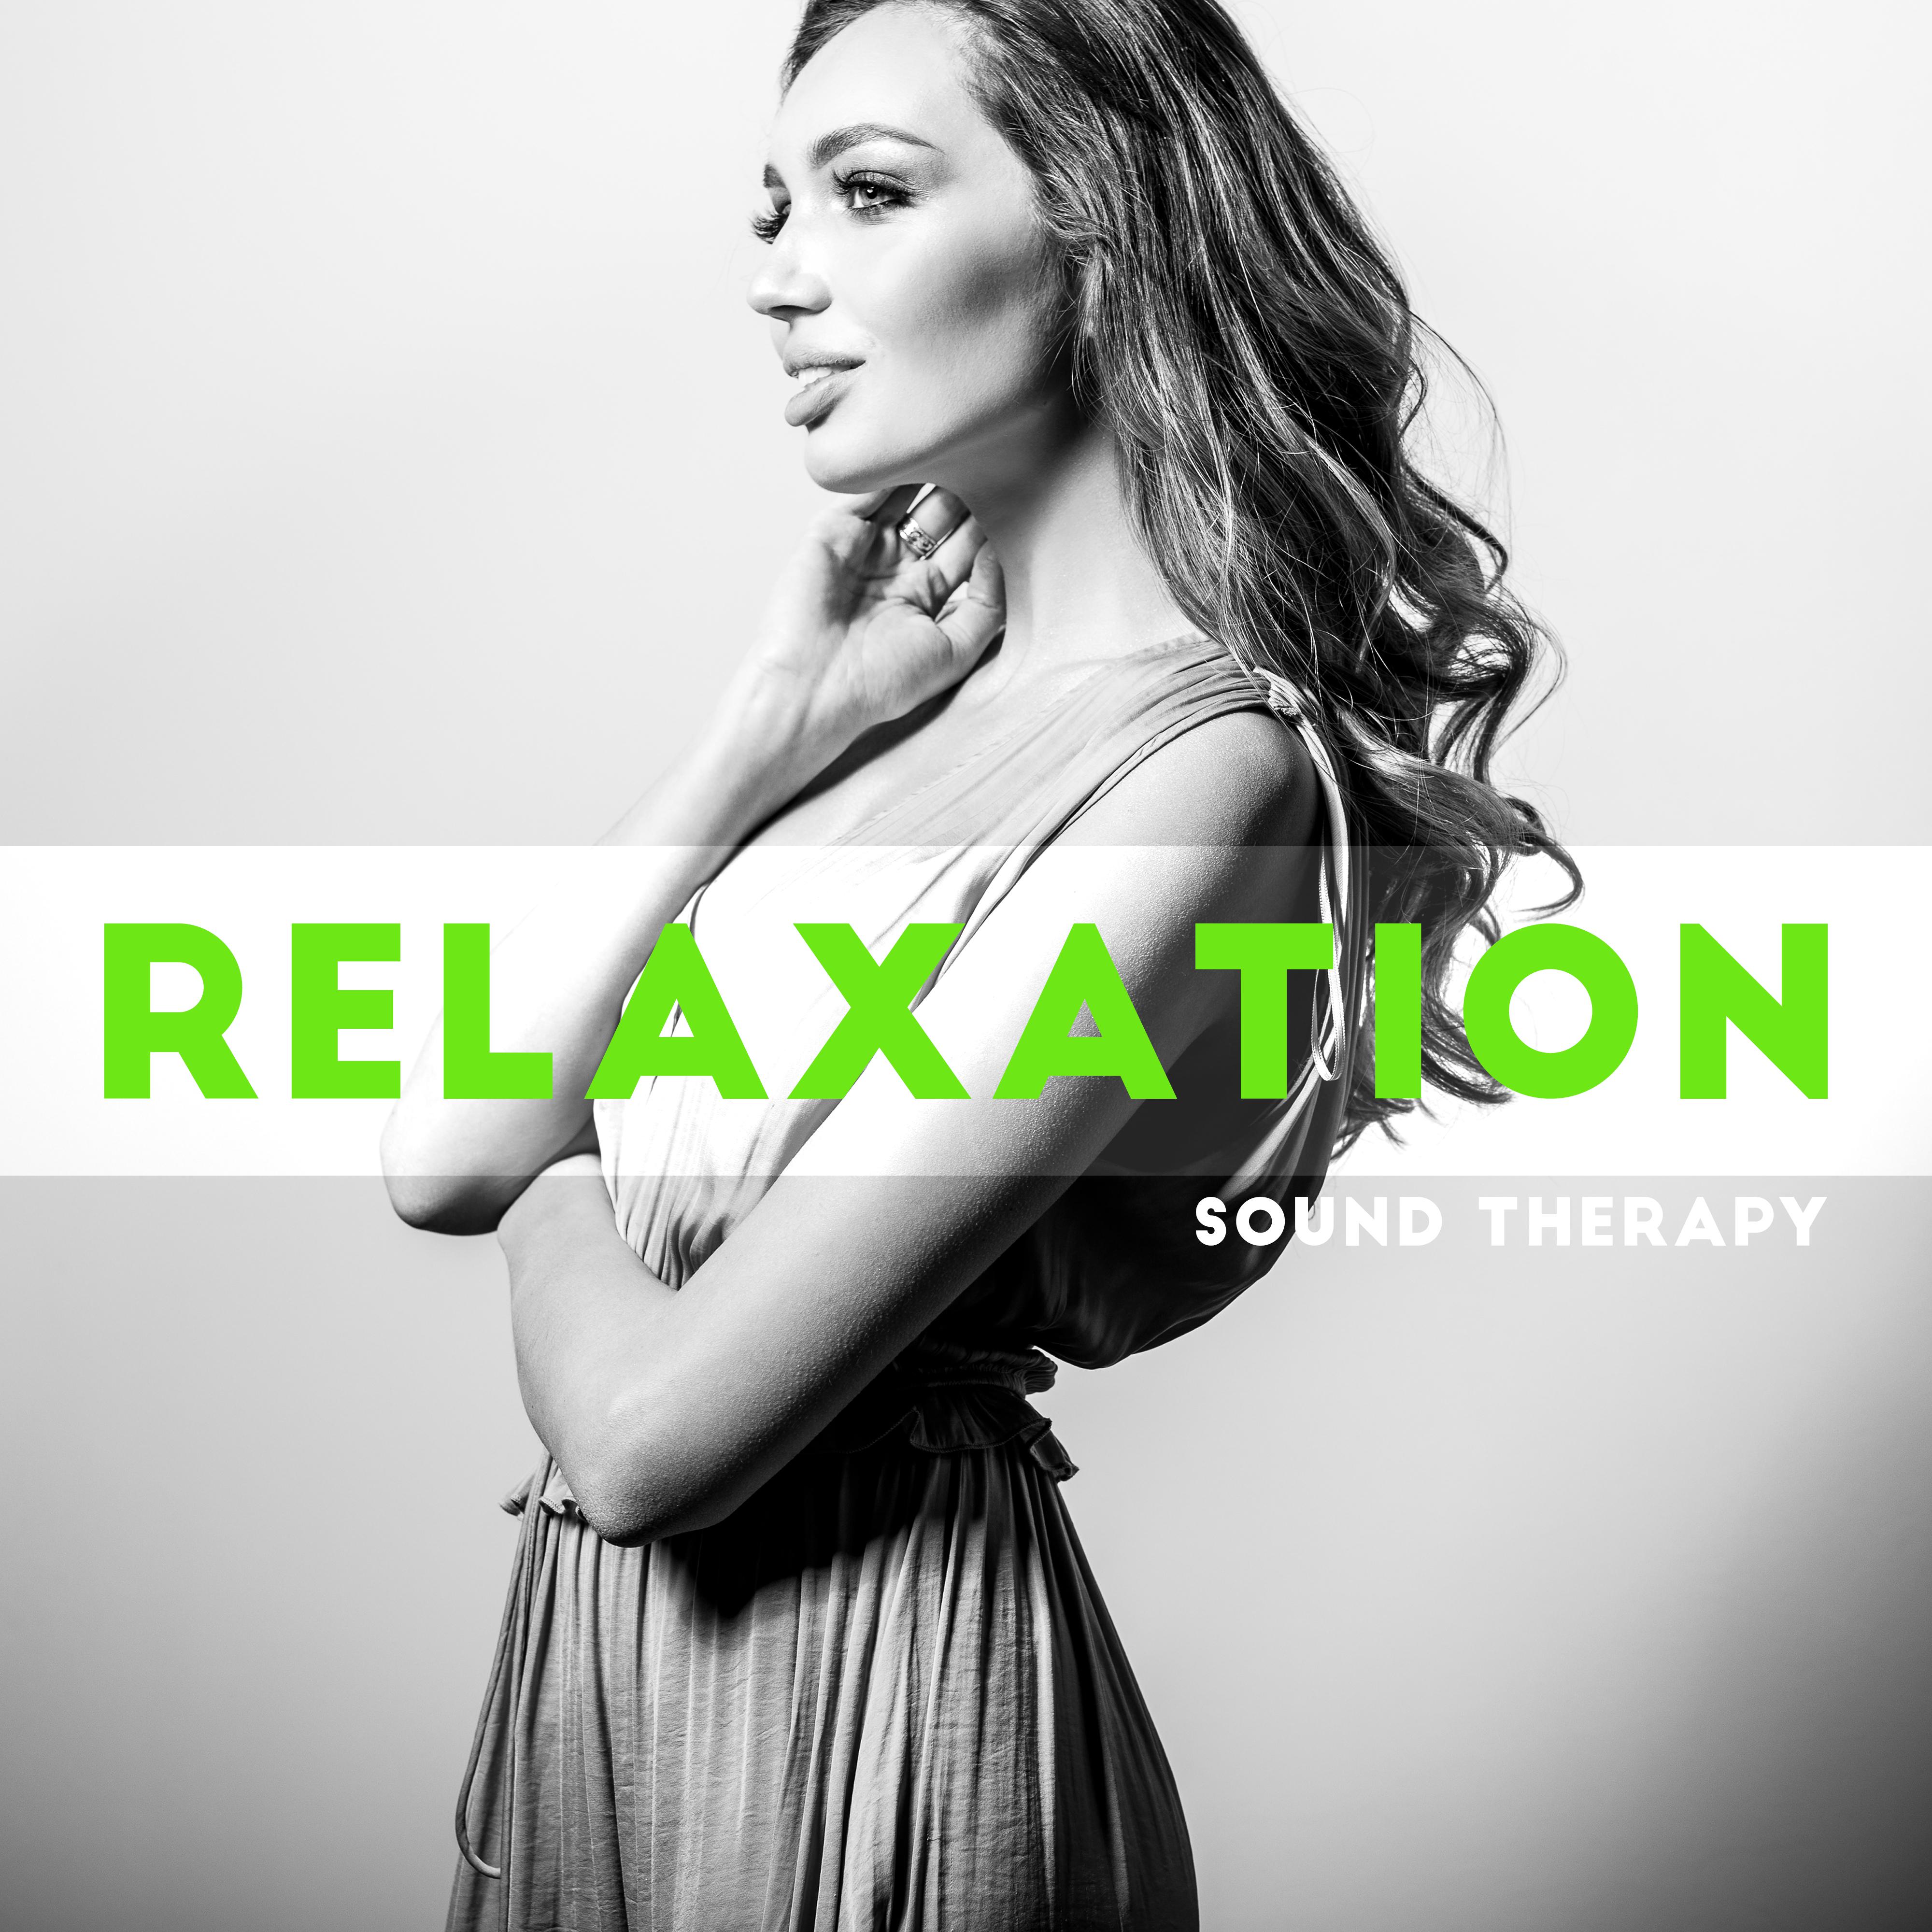 Relaxation Sound Therapy: New Age Music 2019 for Calming Down, Stress Relief, Full Rest, Good Sleep & Improve Mood